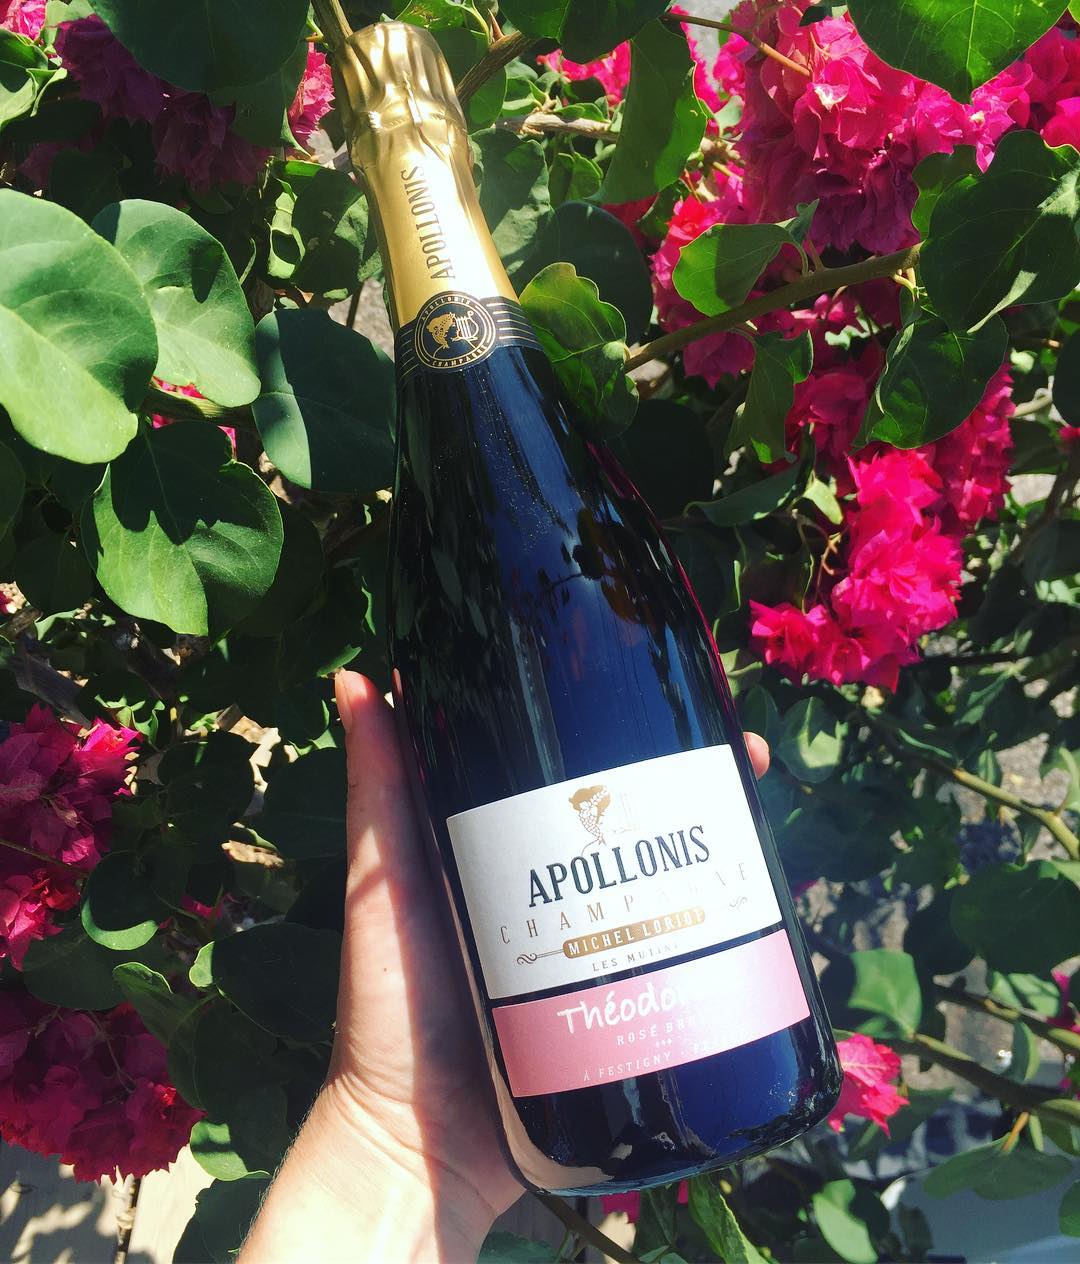 Nothing beats a glass of rosé Champagne in the morning! Meet Champagne Apollonis Theodorine Rosé. Find it here at Vino&Co! @vinoycoibiza #vinoyco #vinoycowines #ibizawineshop #wineshop #ibiza2017 #winelovers #champagne #rosé #rosélovers #roséallday @apollonischampagne